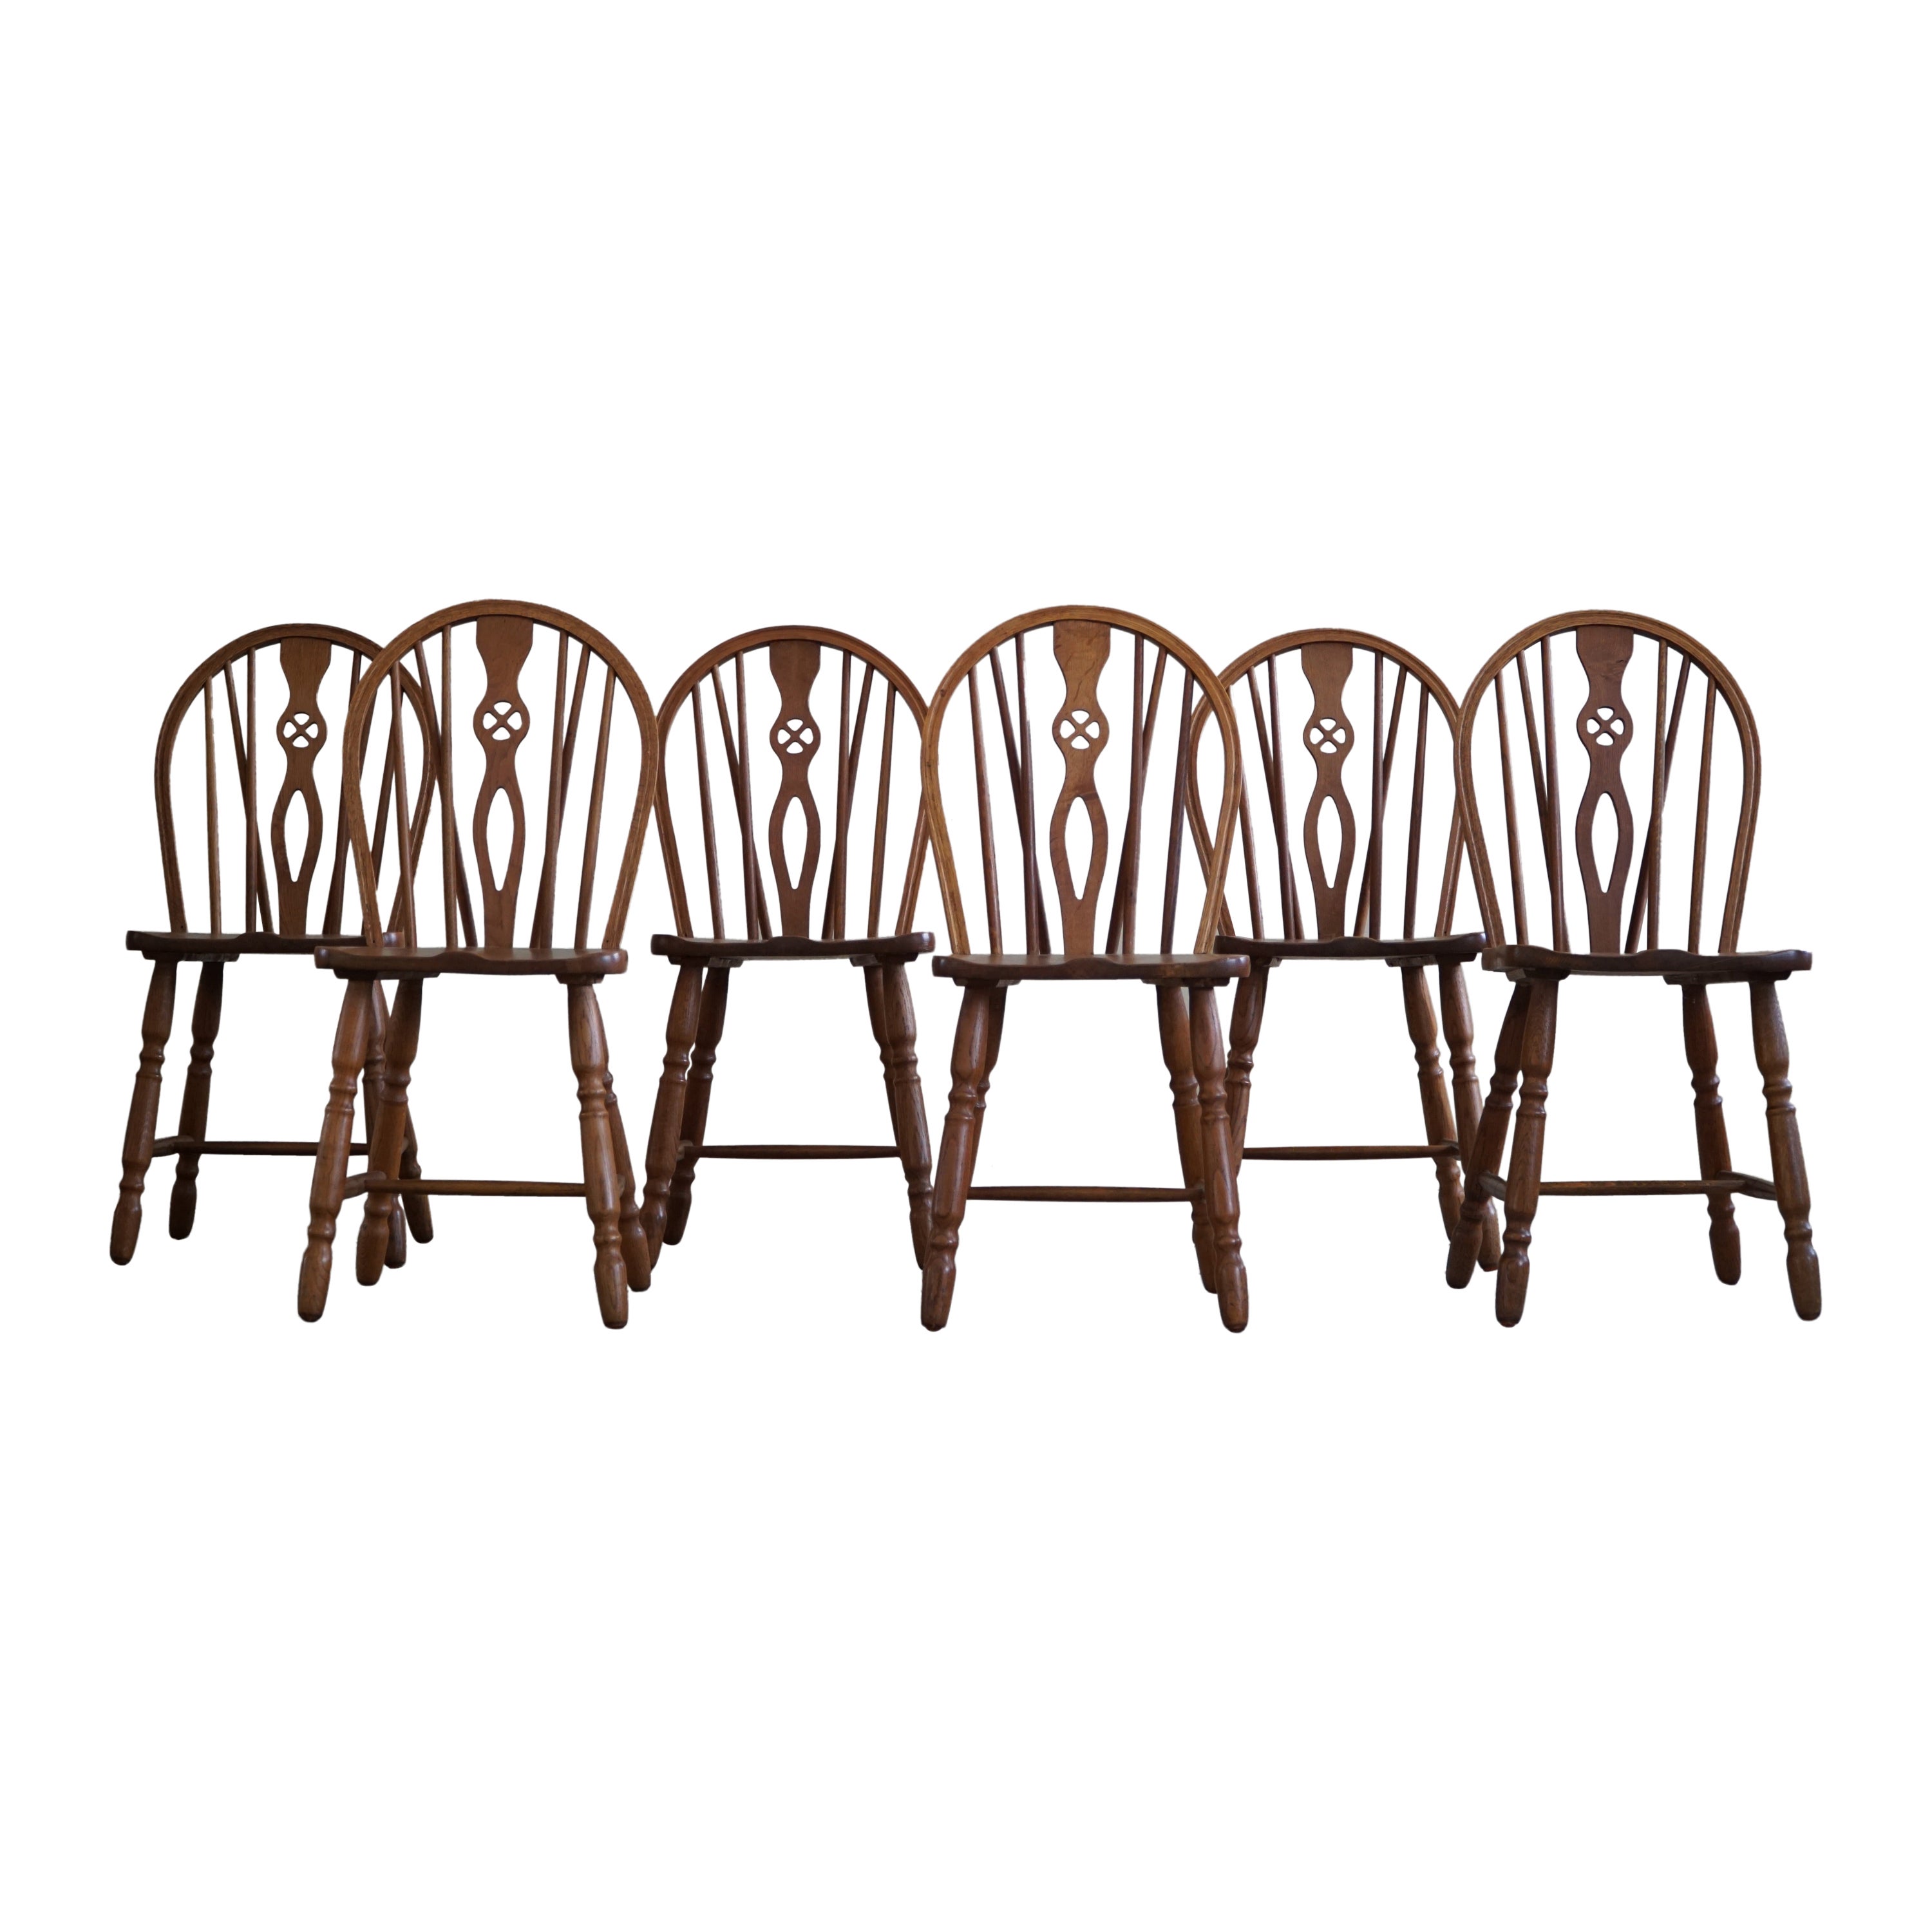 Set of 6 Windsor Dining Room Chairs in Oak, English Edwardian, 19th Century For Sale